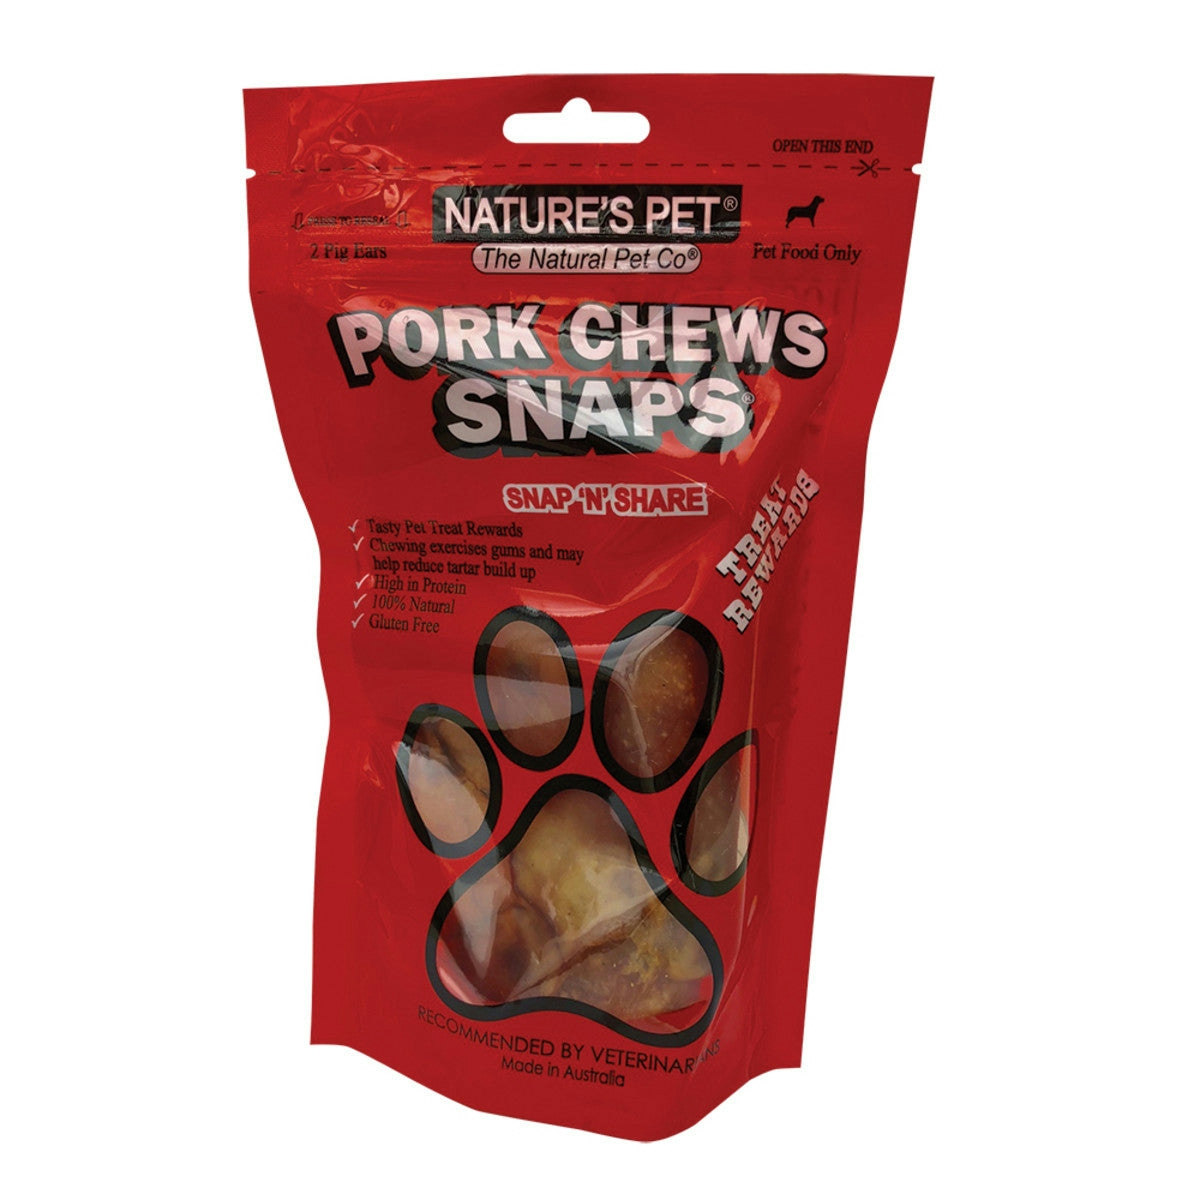 image of Nature's Pet Pork Chews Snaps (Pigs Ears) x 2 Pack on white background